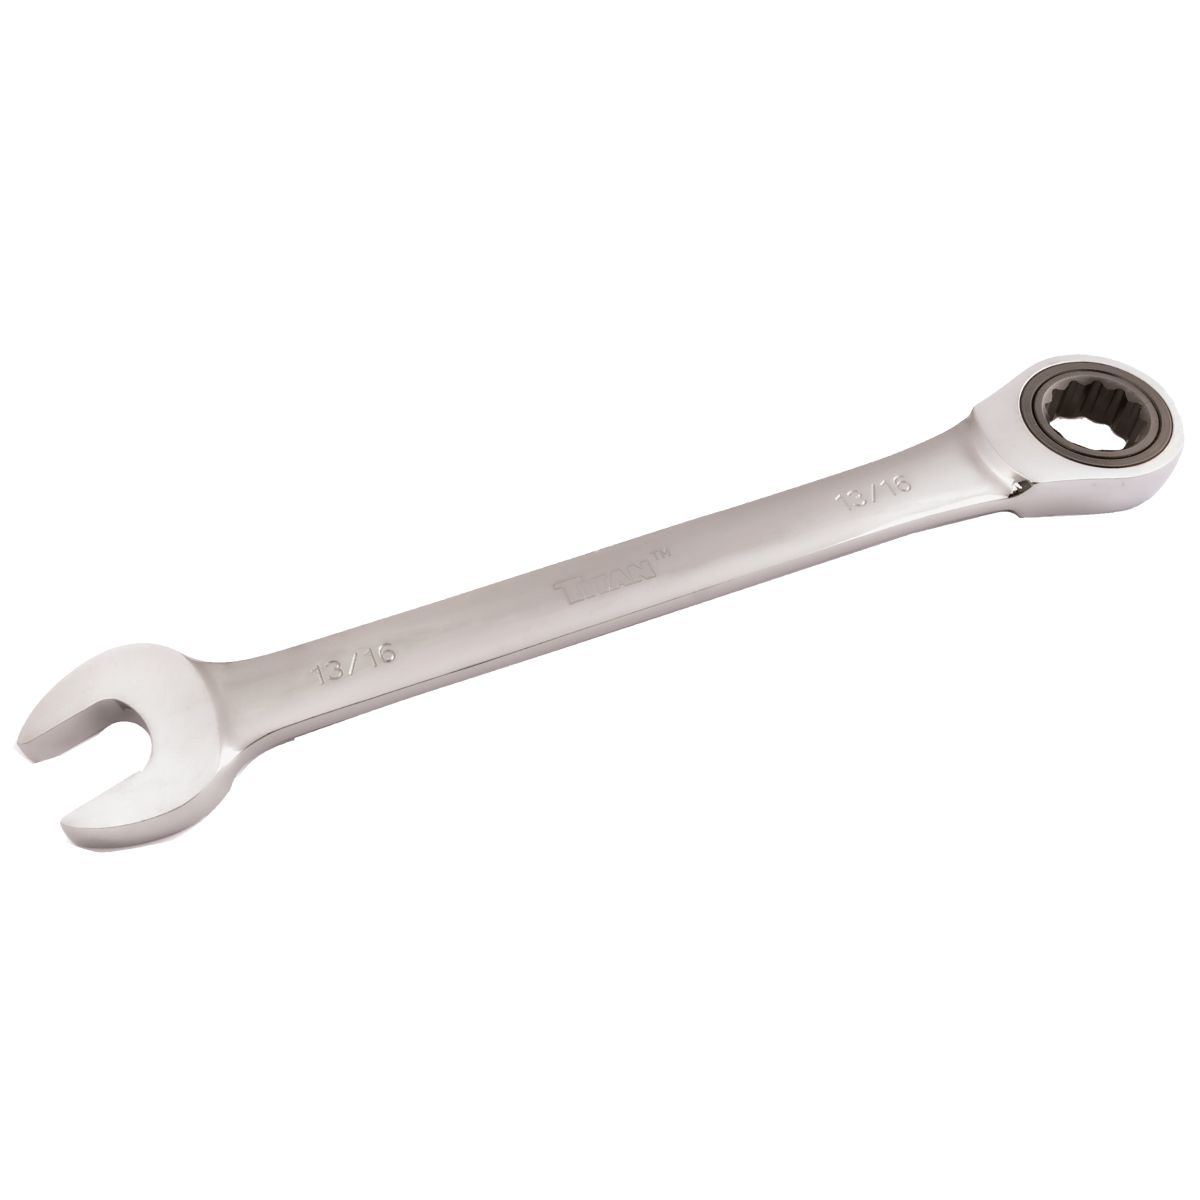 Titan 12610  13/16" Ratcheting Combination Wrench